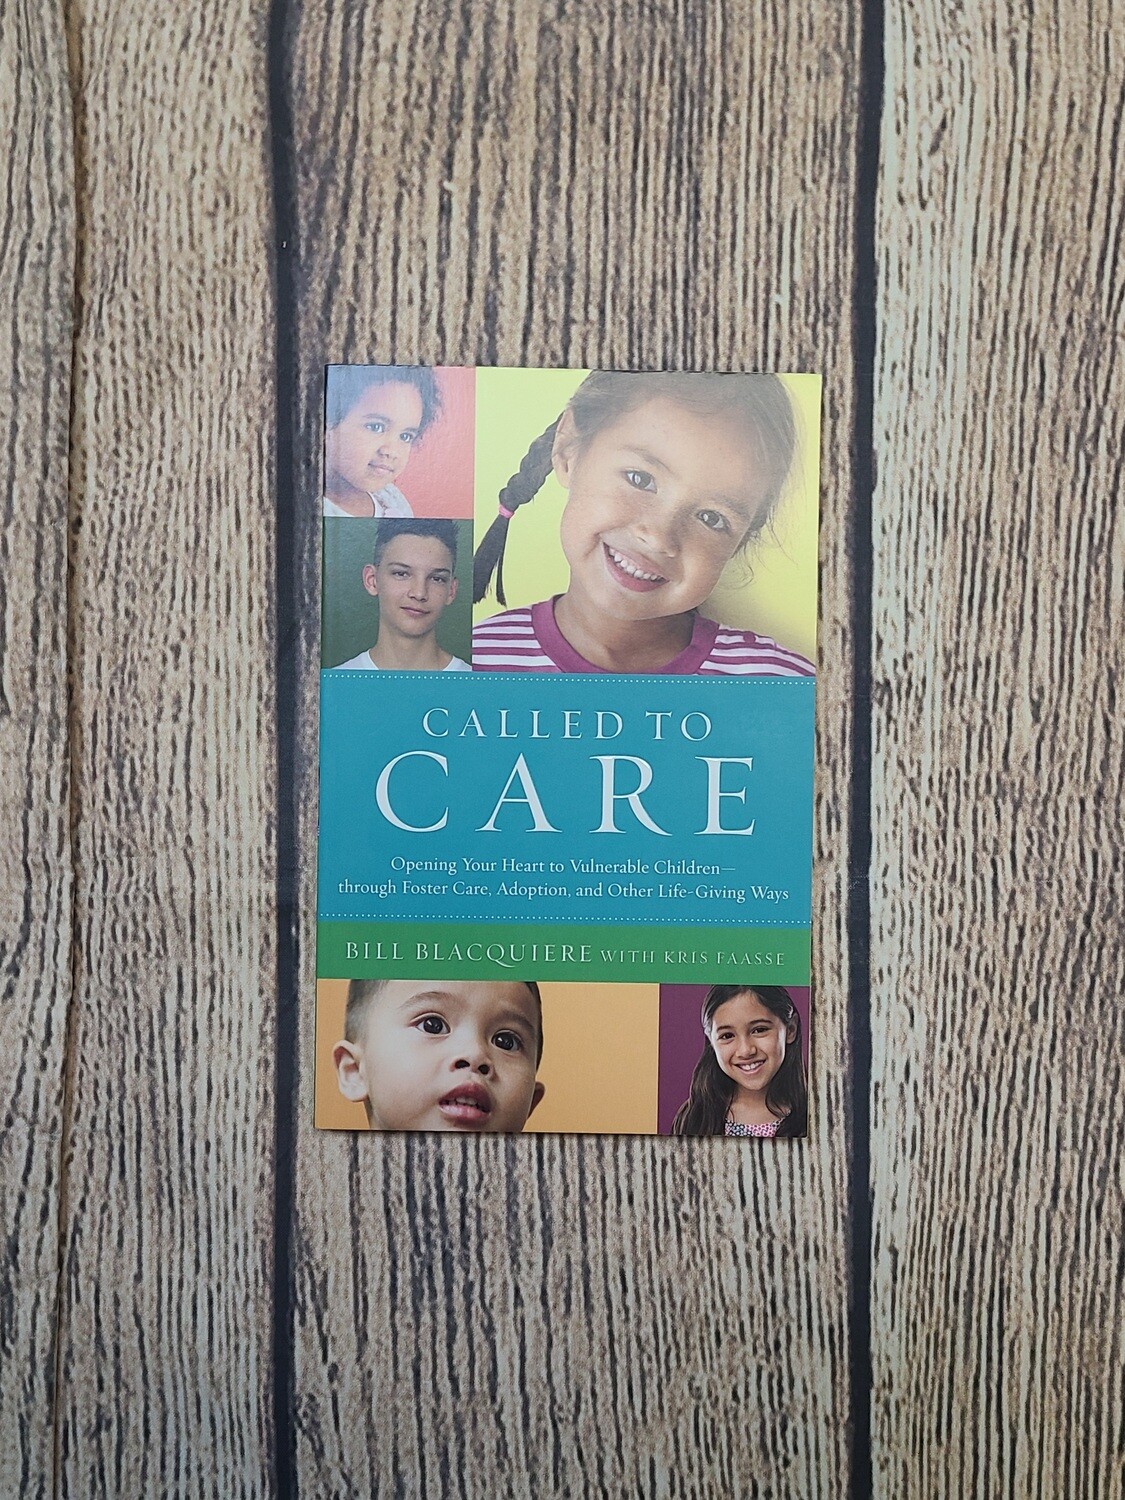 Called to Care: Opening Your Heart to Vulnerable Children through Foster Care, Adoption, and Other Life-Giving Ways by Bill Blacquiere with Kris Faasse